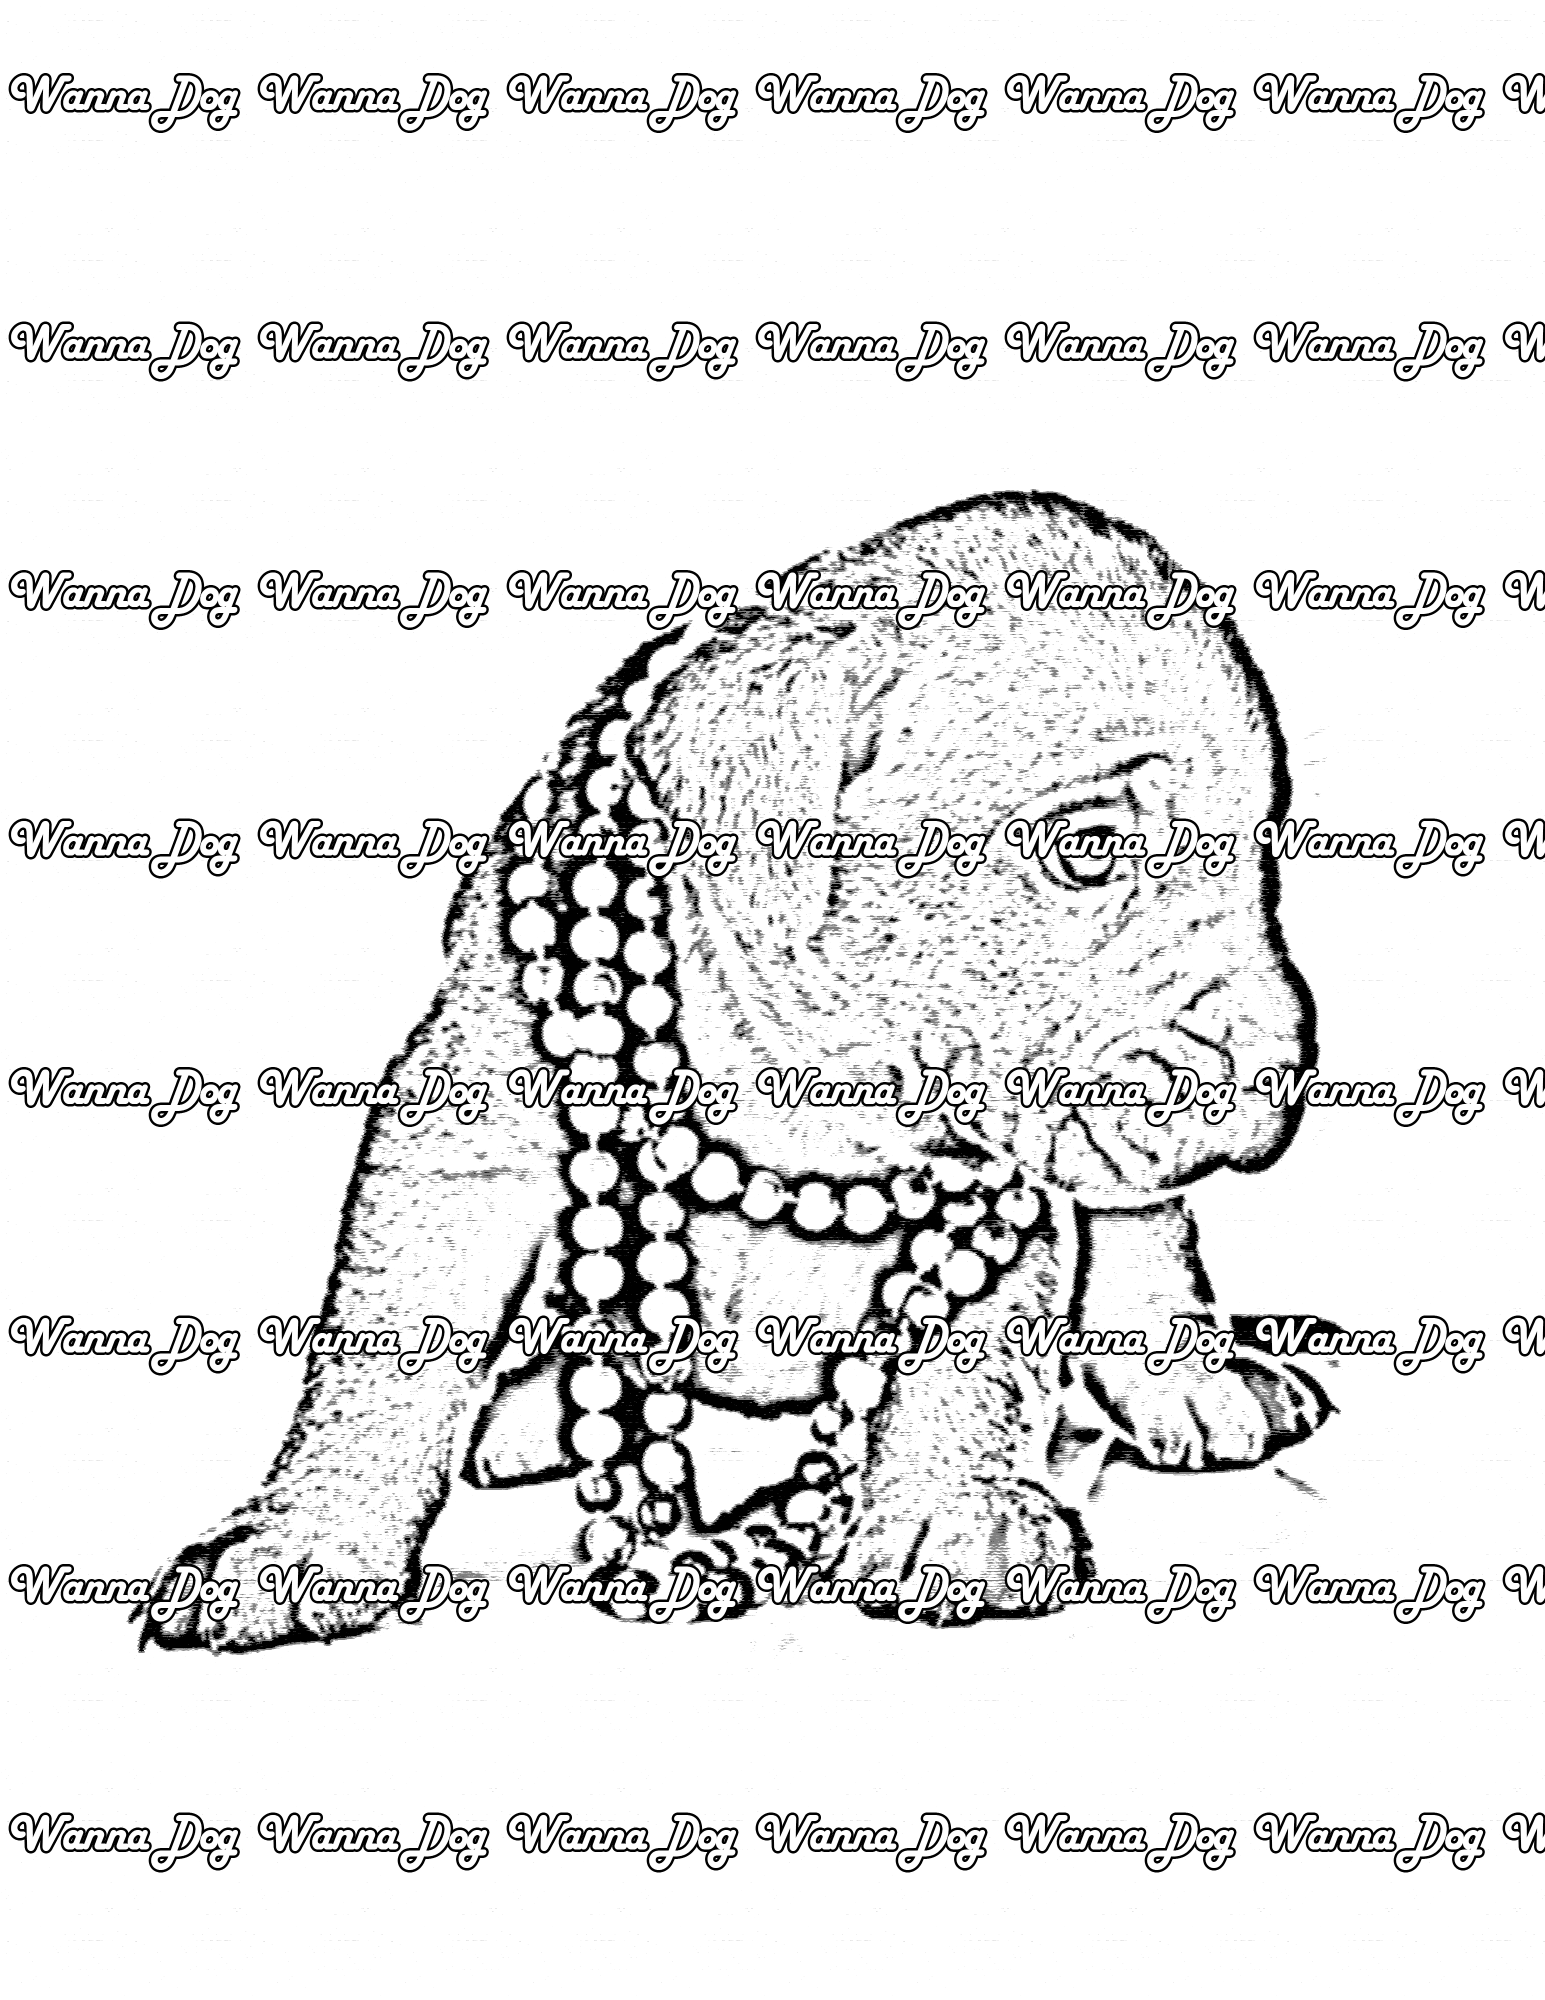 Mastiff Coloring Page of a Mastiff wearing a necklace